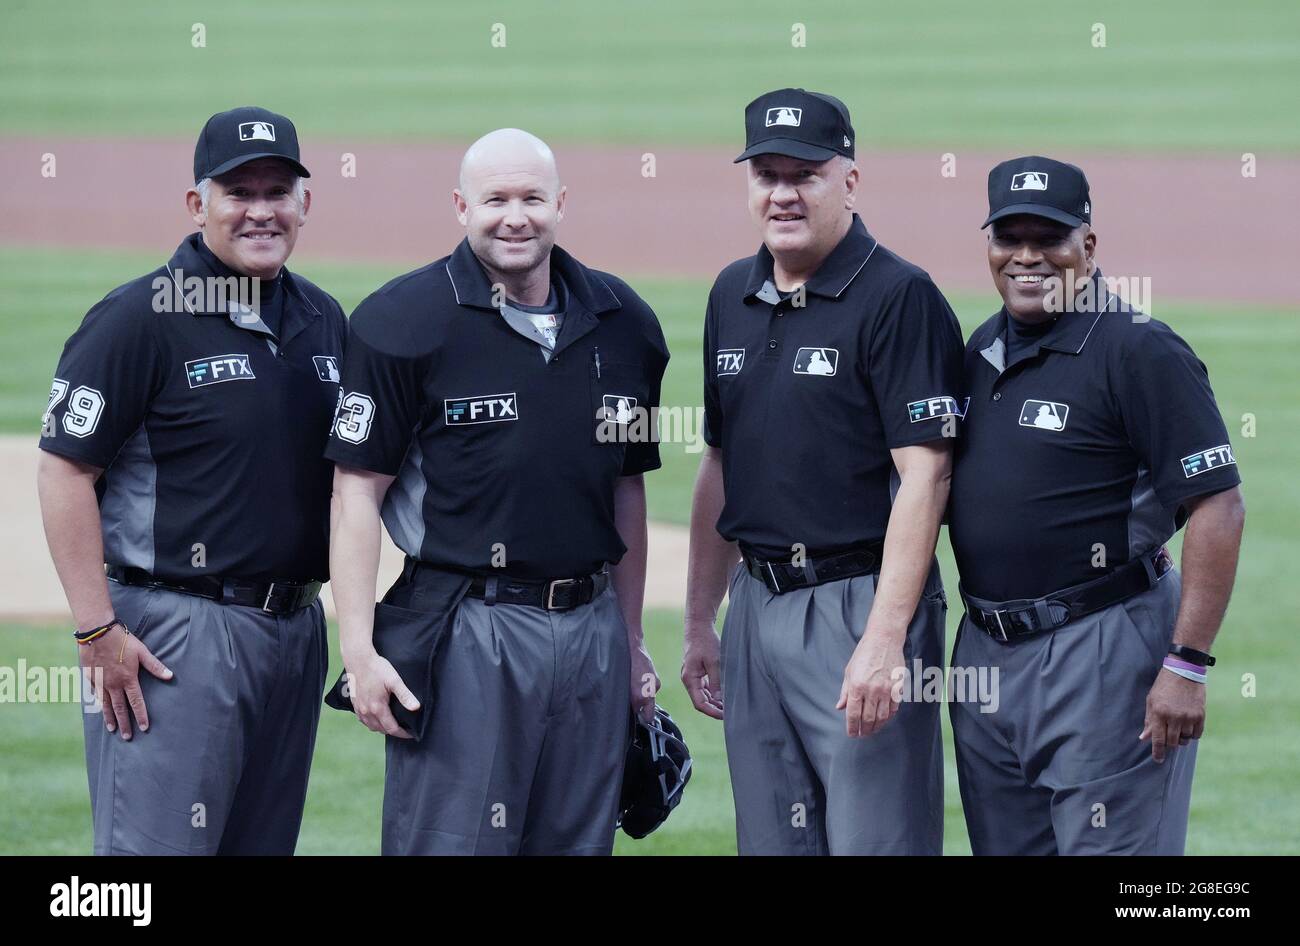 St. Louis, United States. 19th July, 2021. Major League umpires (L to R) Manny Gonzalez, Mike Estabrook, Jeff Nelson and Laz Diaz, pose for a photograph before the Chicago Cubs-St. Louis Cardinals baseball game at Busch Stadium in St. Louis on Monday, July 19, 2021. Photo by Bill Greenblatt/UPI Credit: UPI/Alamy Live News Stock Photo